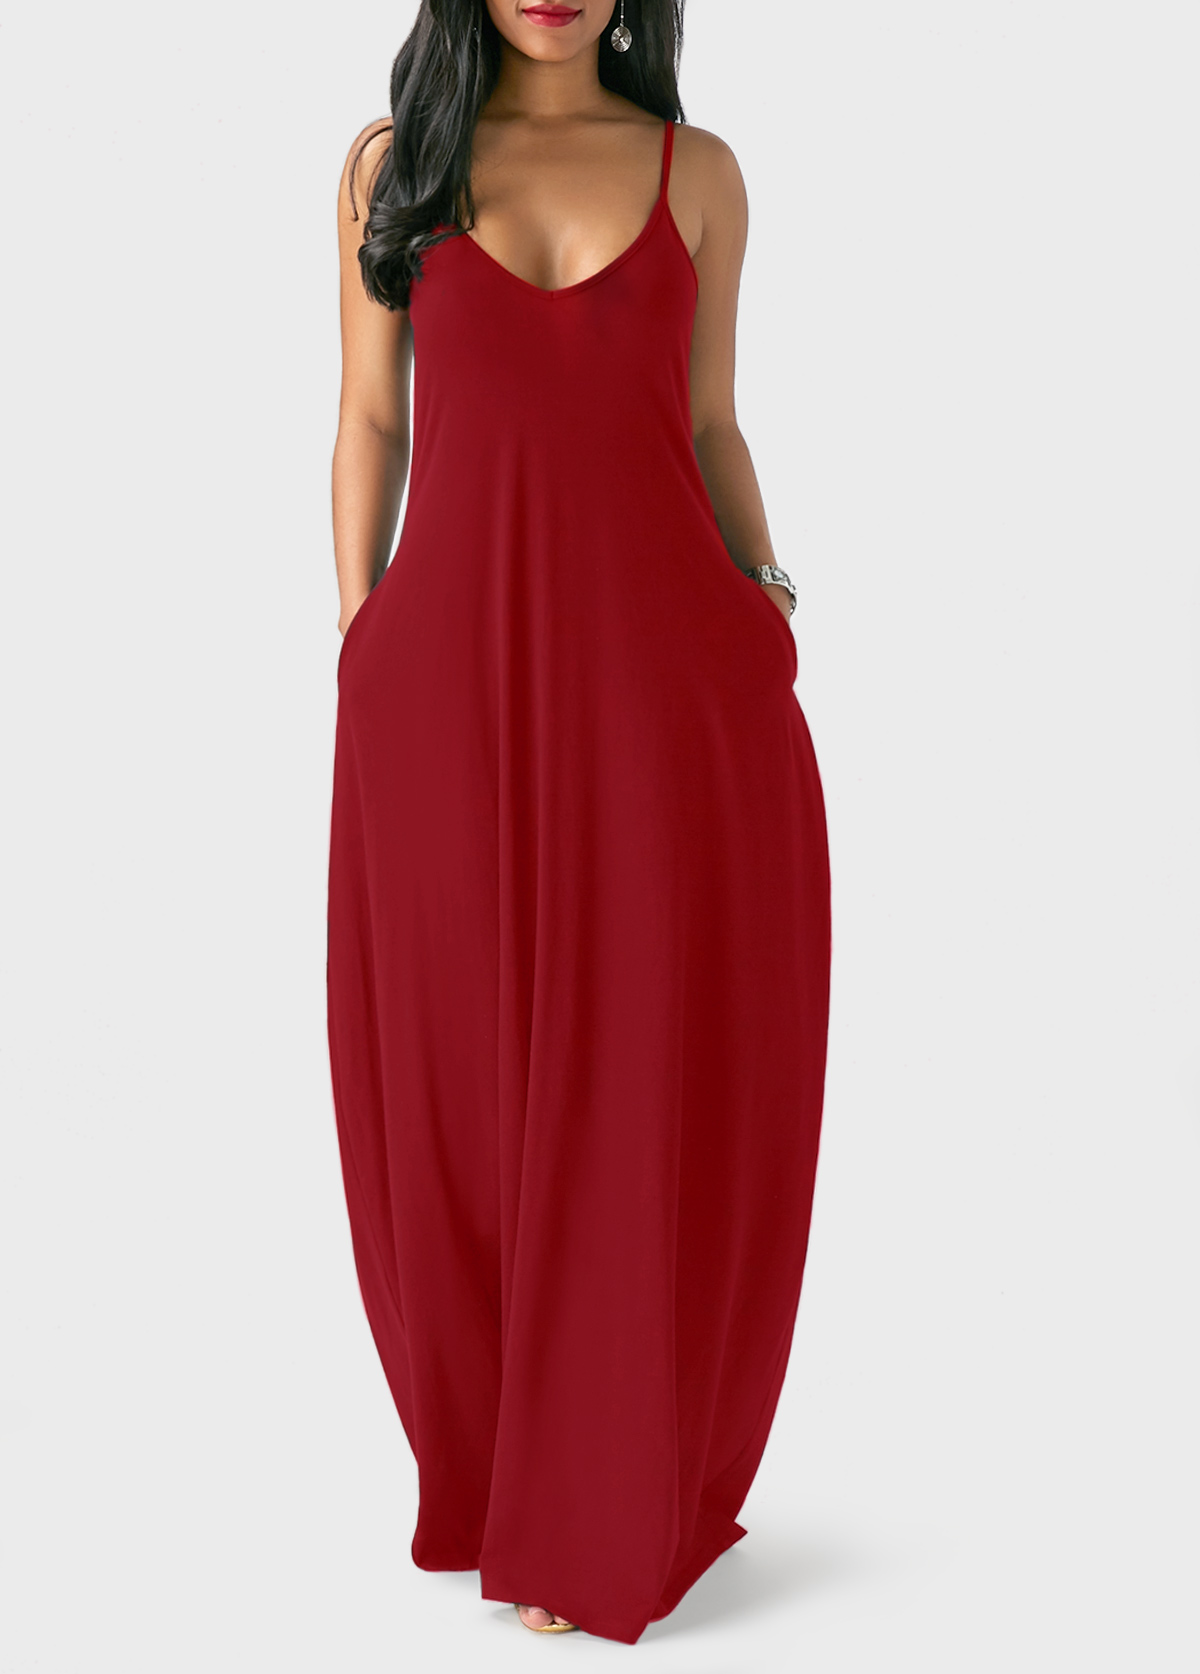 Open Back Pocket Decorated Maxi Dress | Rosewe.com - USD $26.26